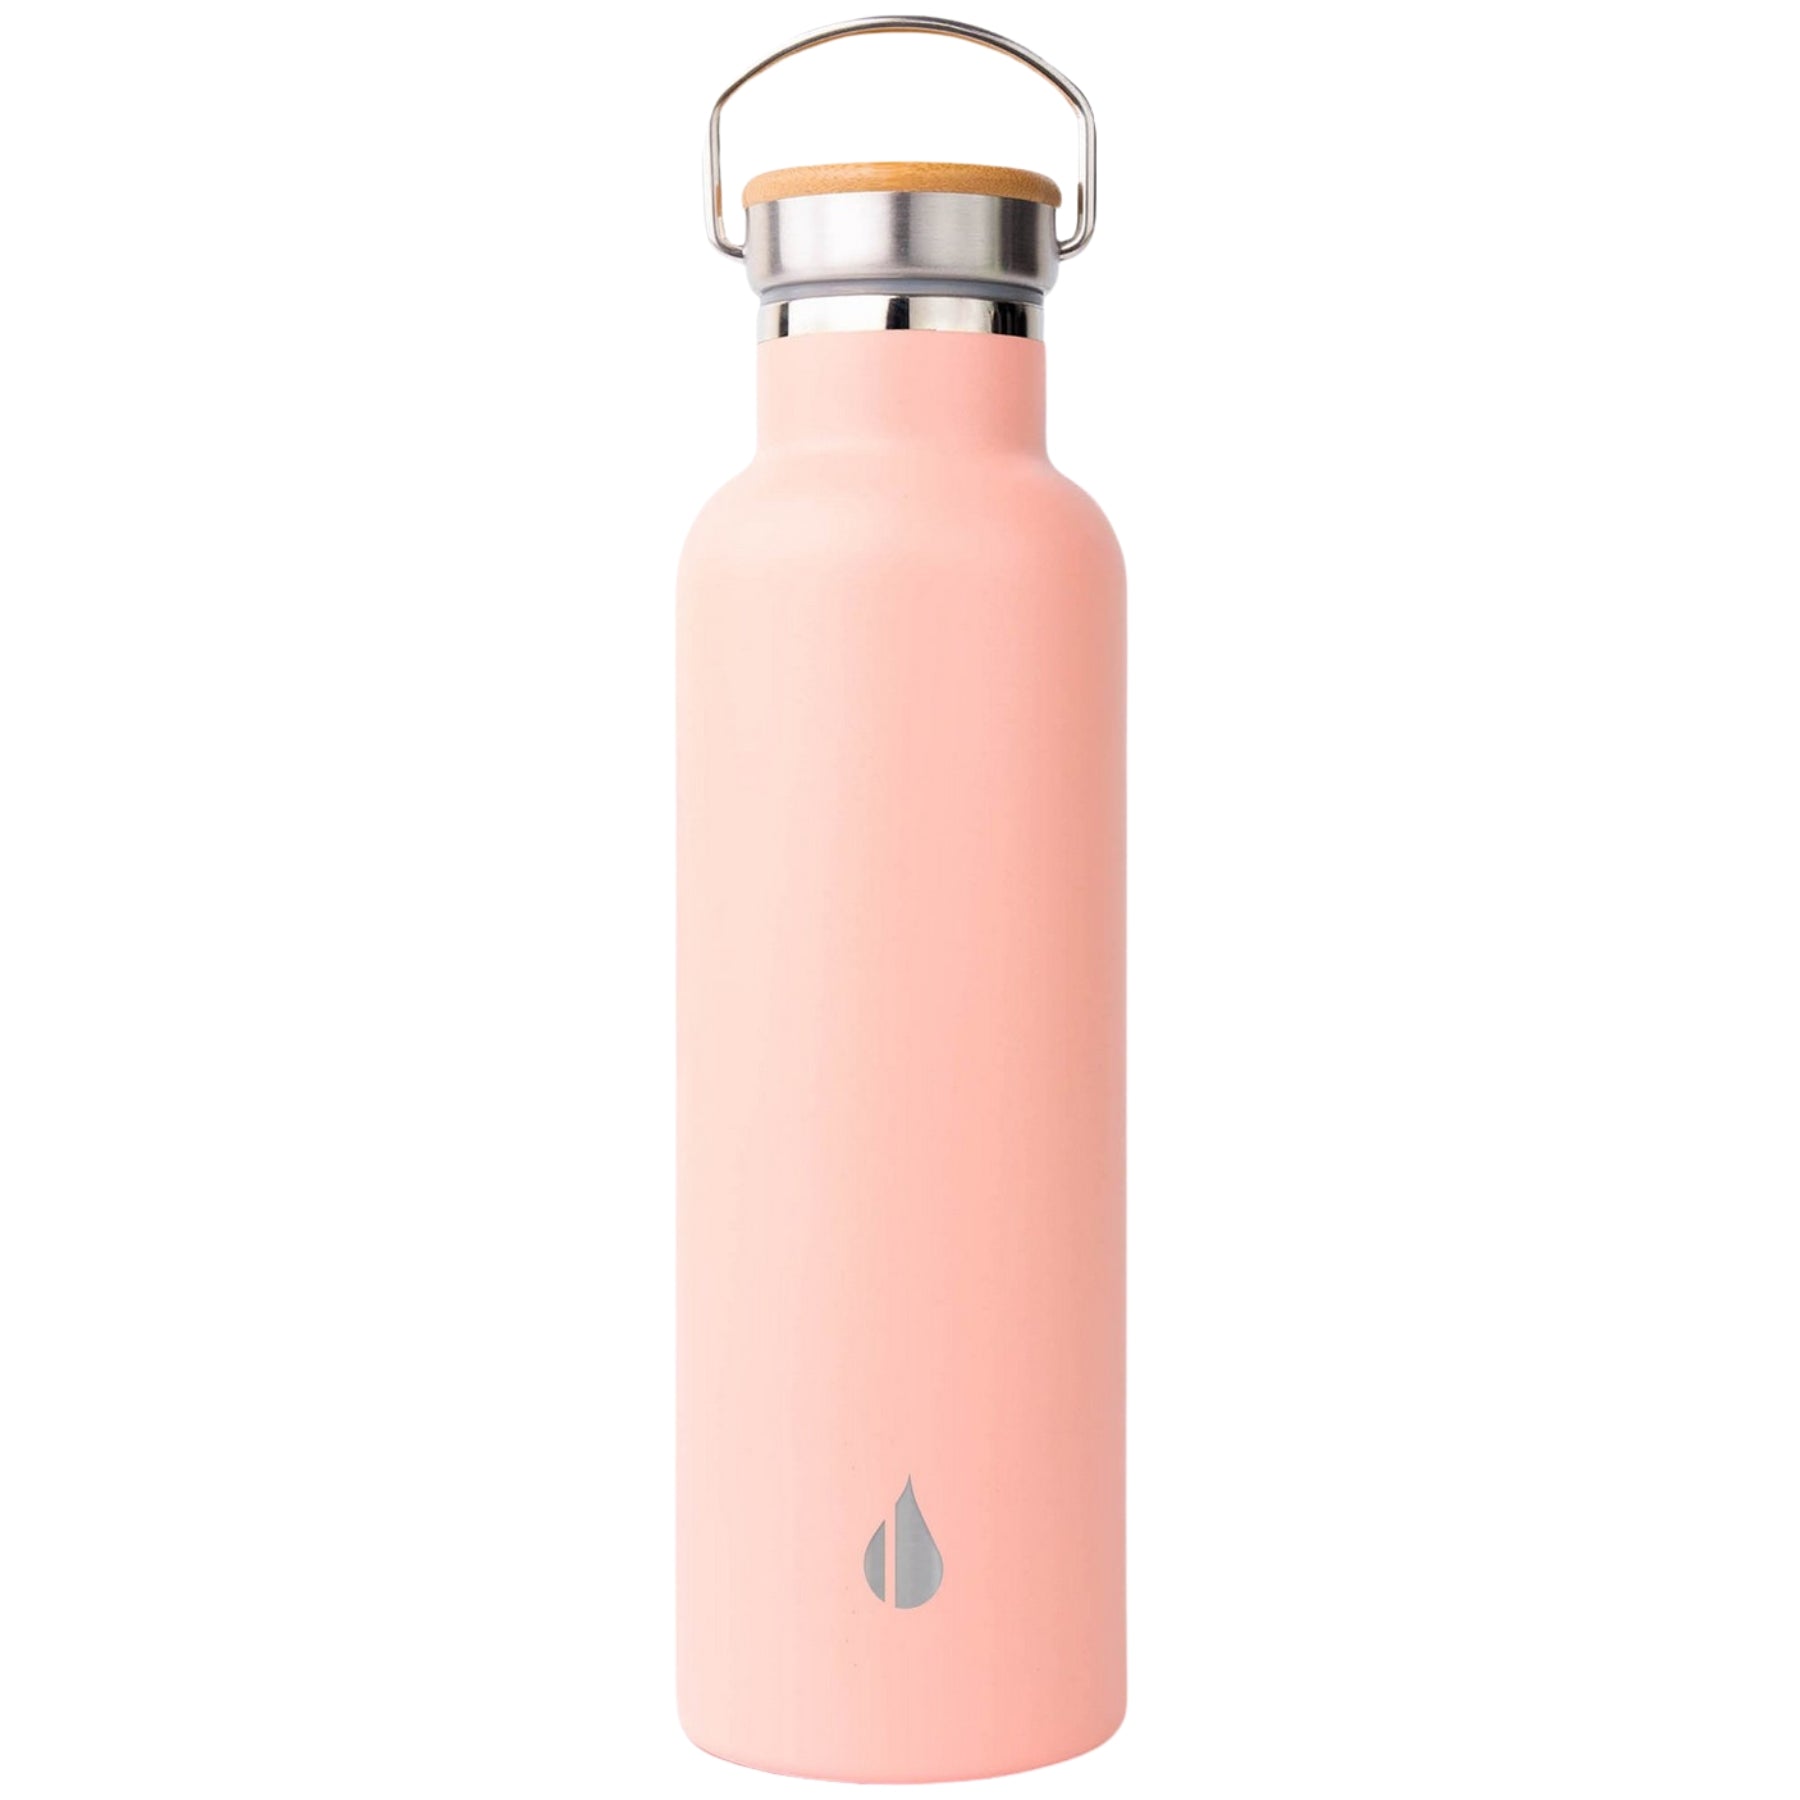 Customizable Elemental® 25 oz Stainless Steel Insulated Bottle in rose